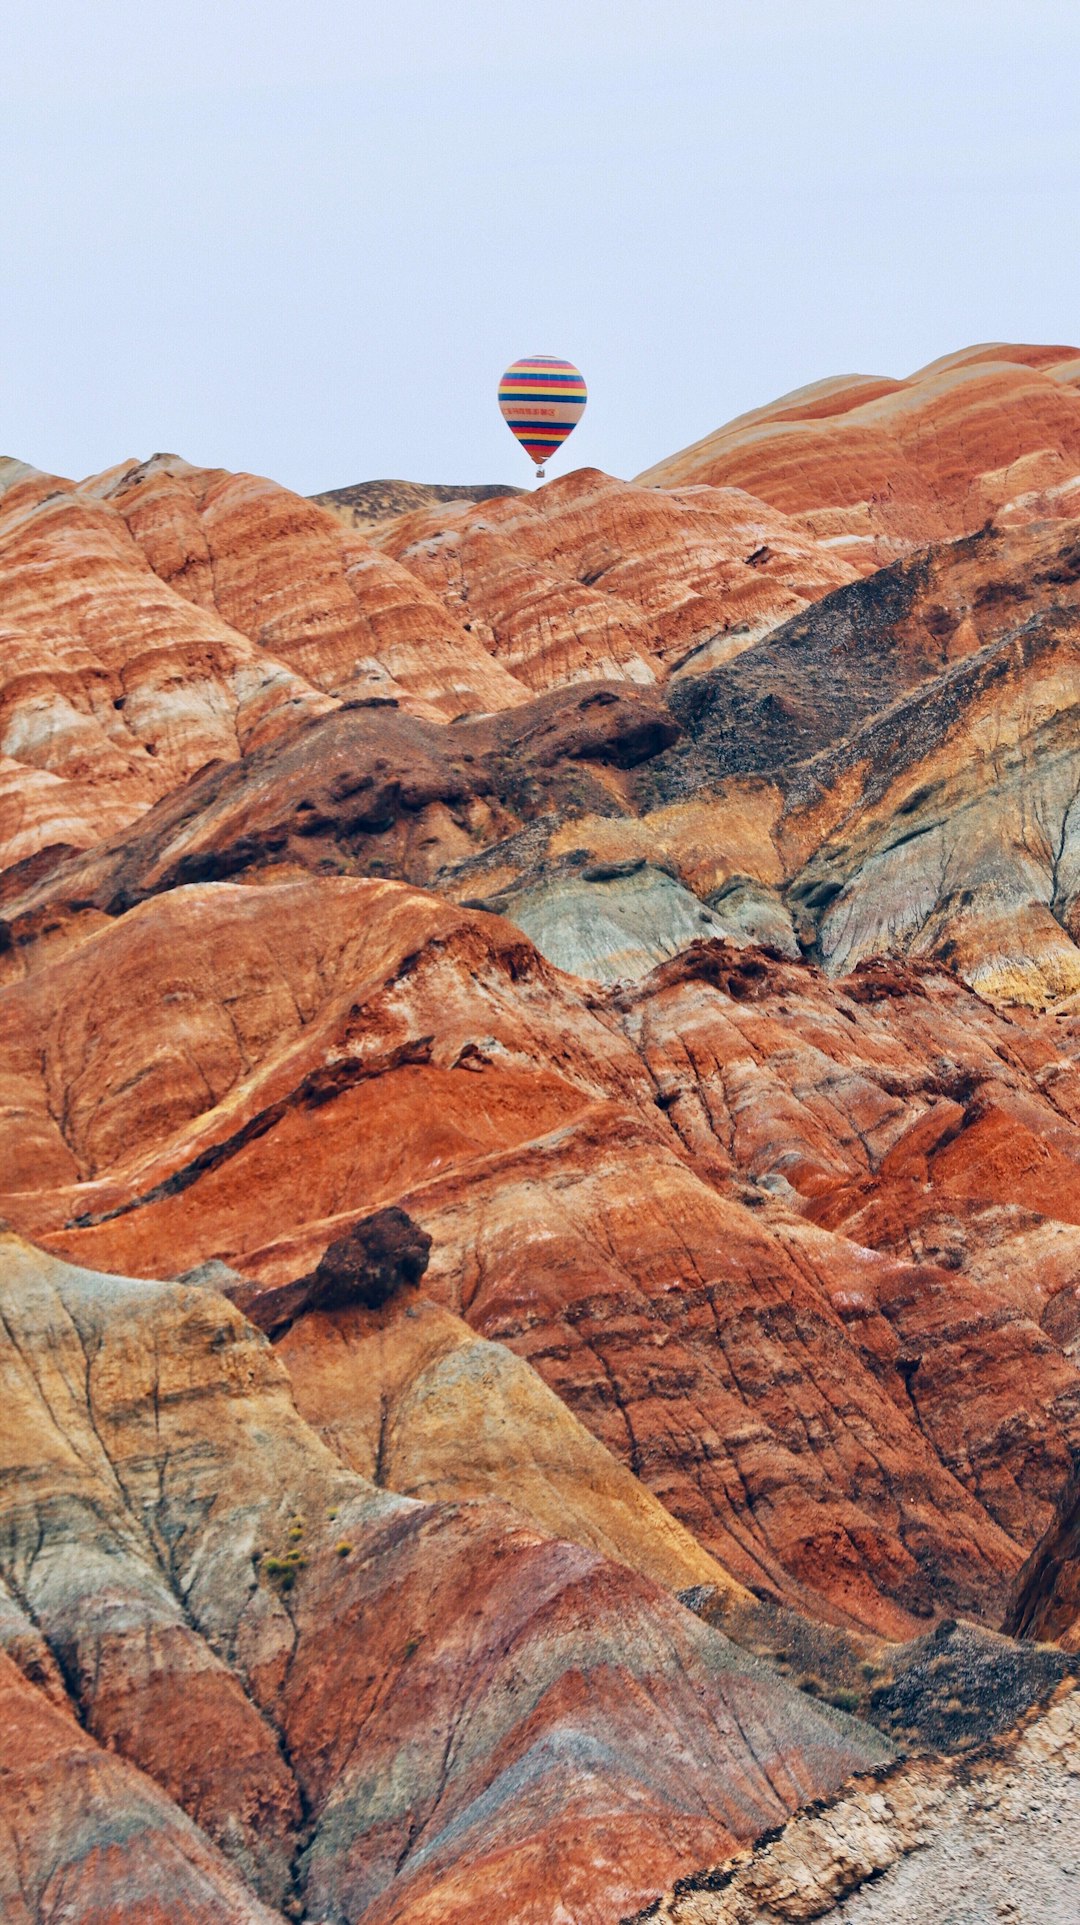 red and brown hot air balloon above mountain